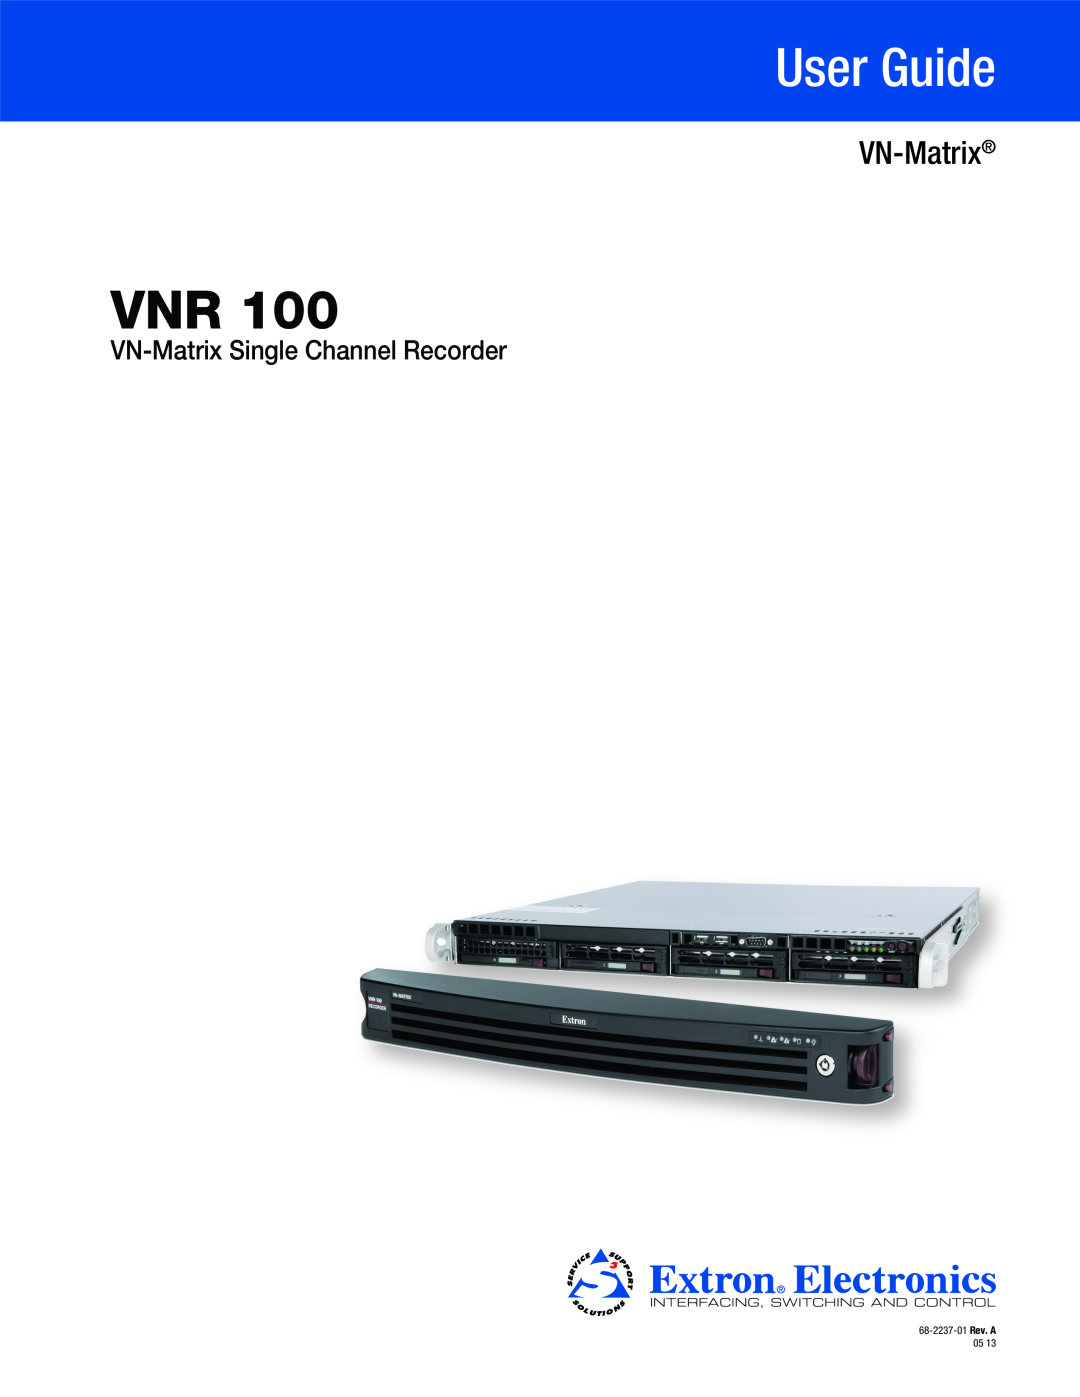 Extron electronic VNR 100 manual User Guide, VN-MatrixSingle Channel Recorder 